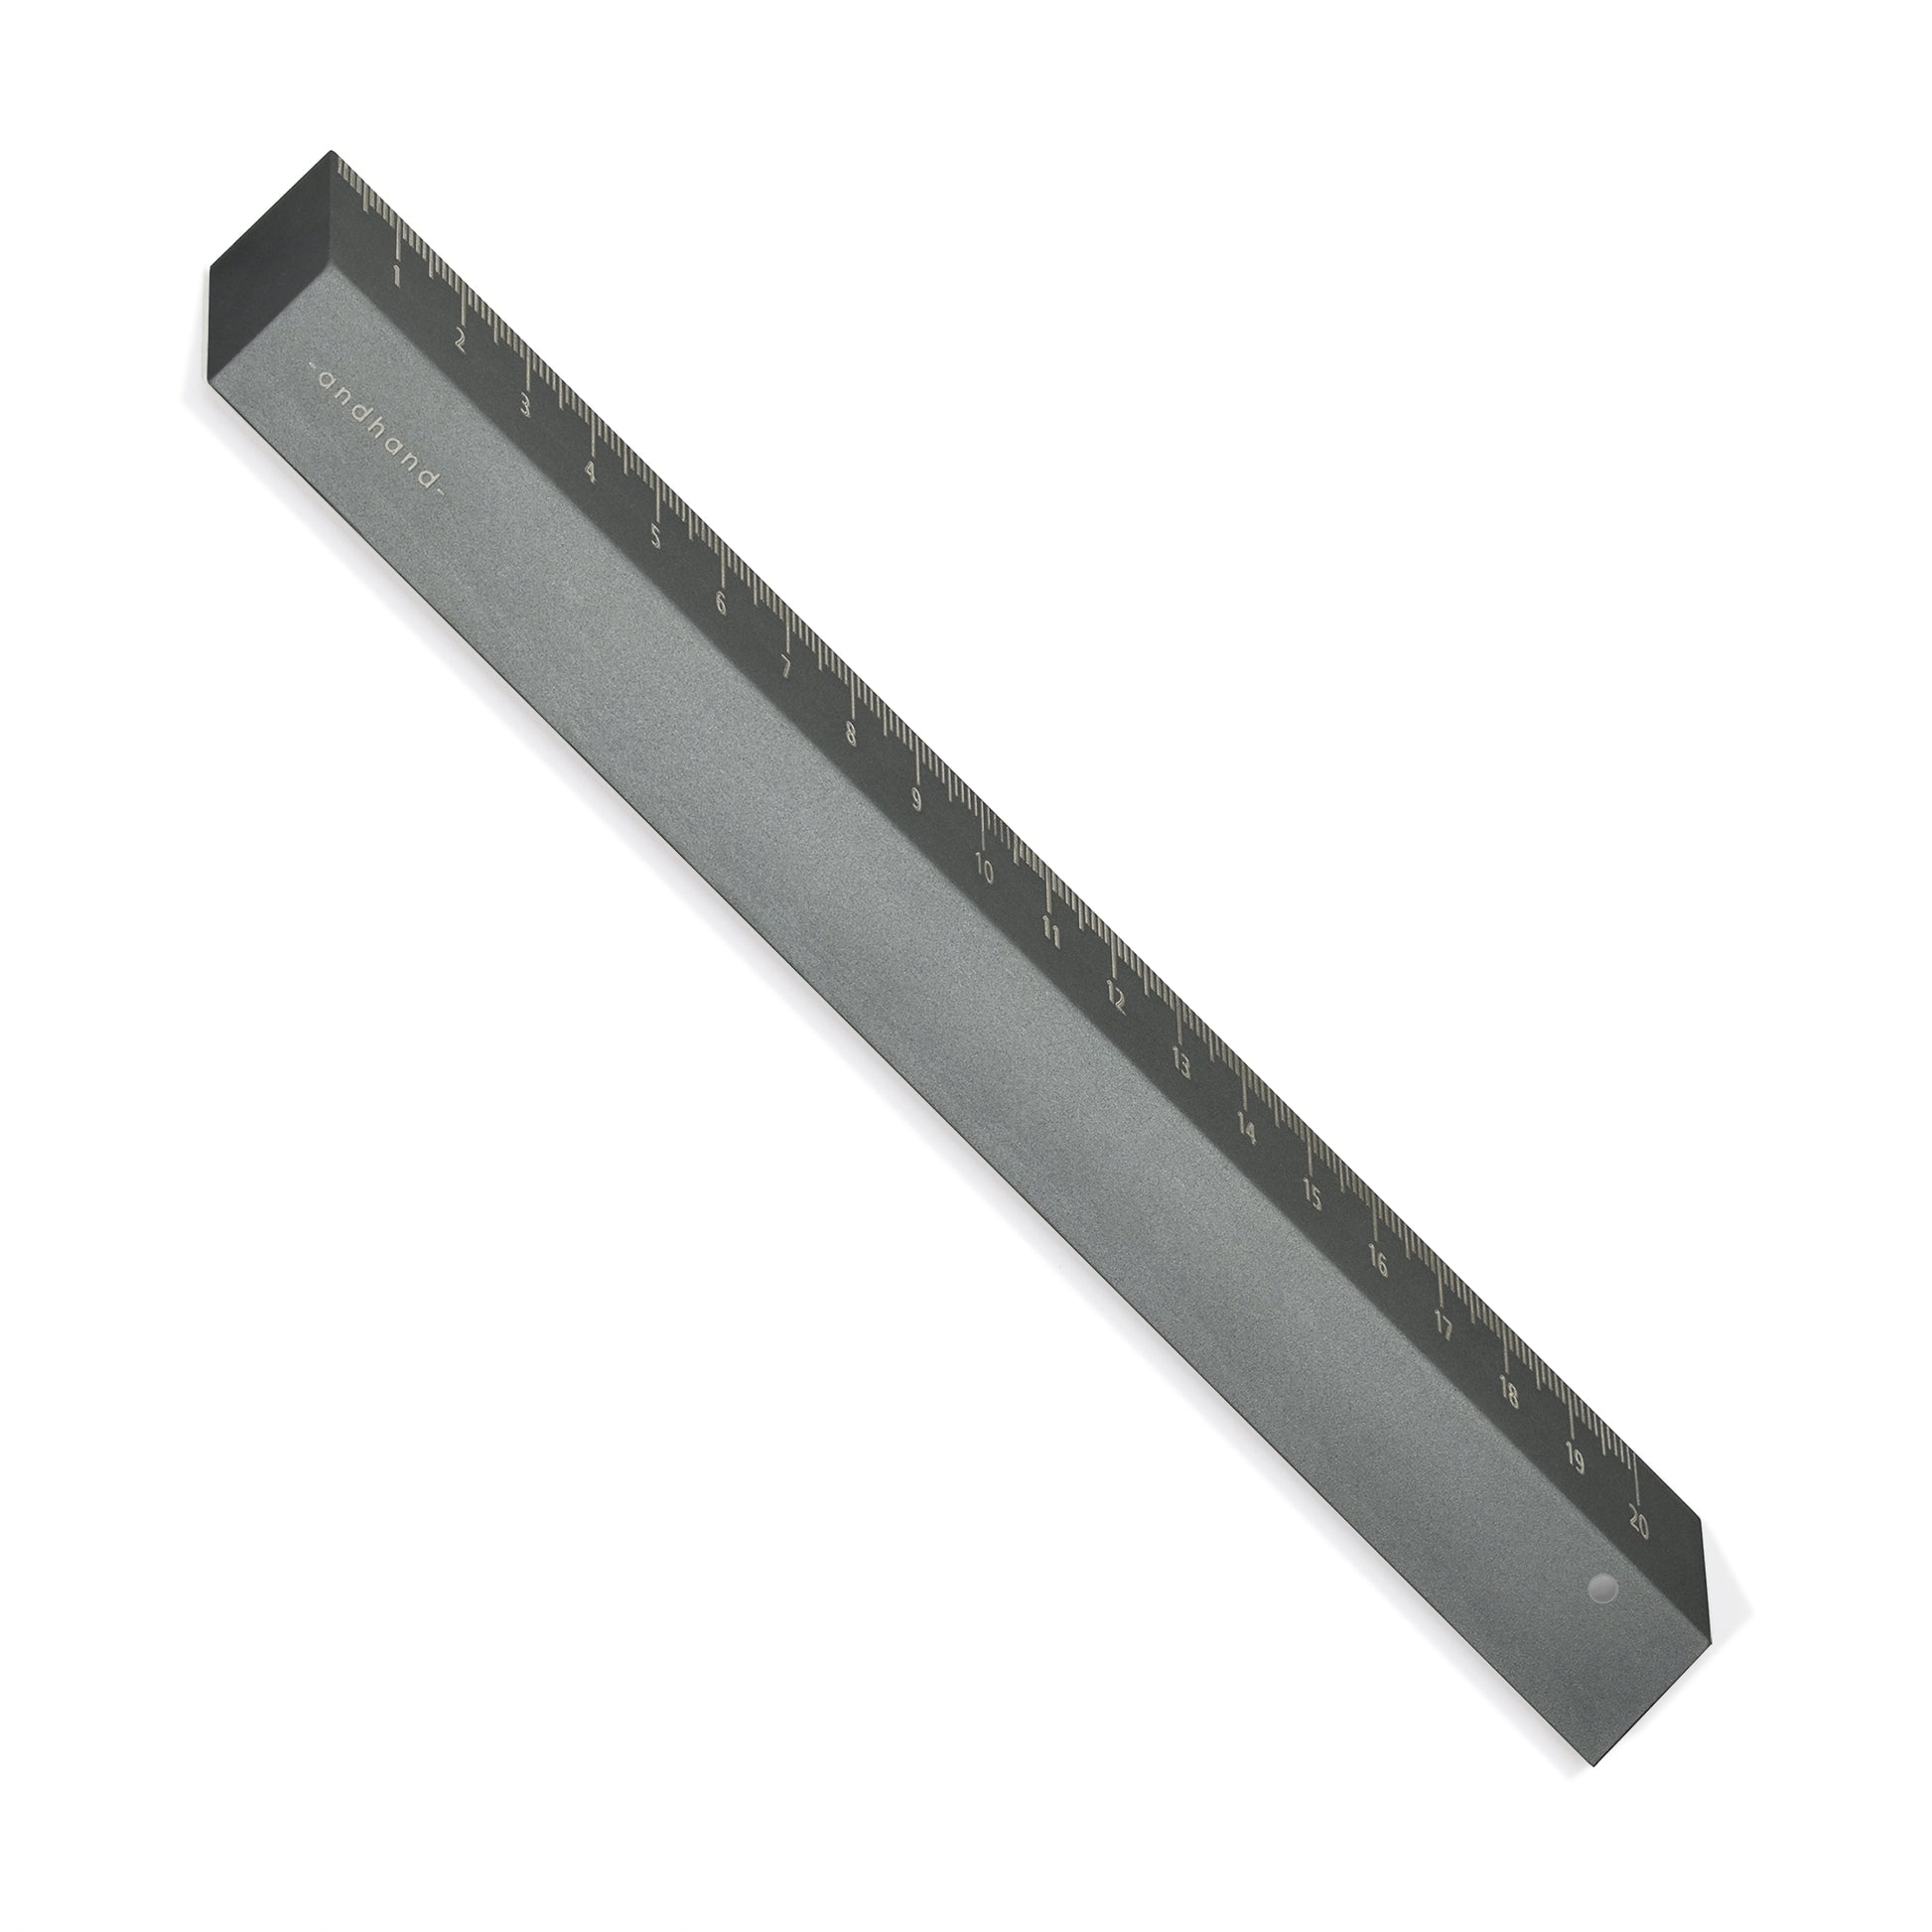 The illusion ruler by Andhand, modern and striking design. Its angled profile allows for extremely accurate mark making and measurements in both metric and imperial. Shown here in slate grey satin anodized finish.